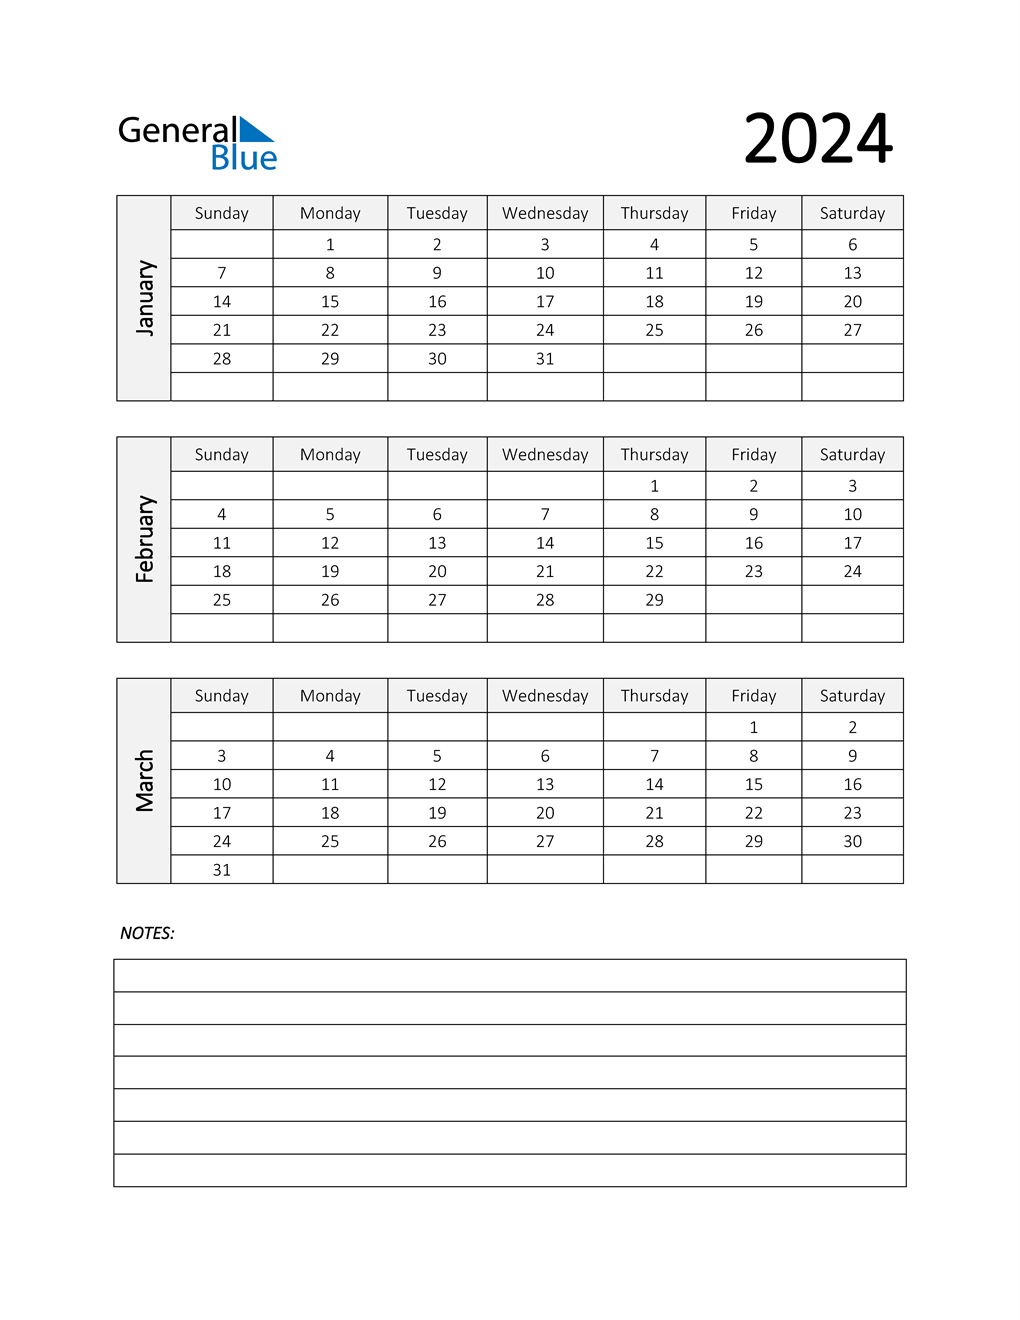  Q1 2024 Calendar with Notes